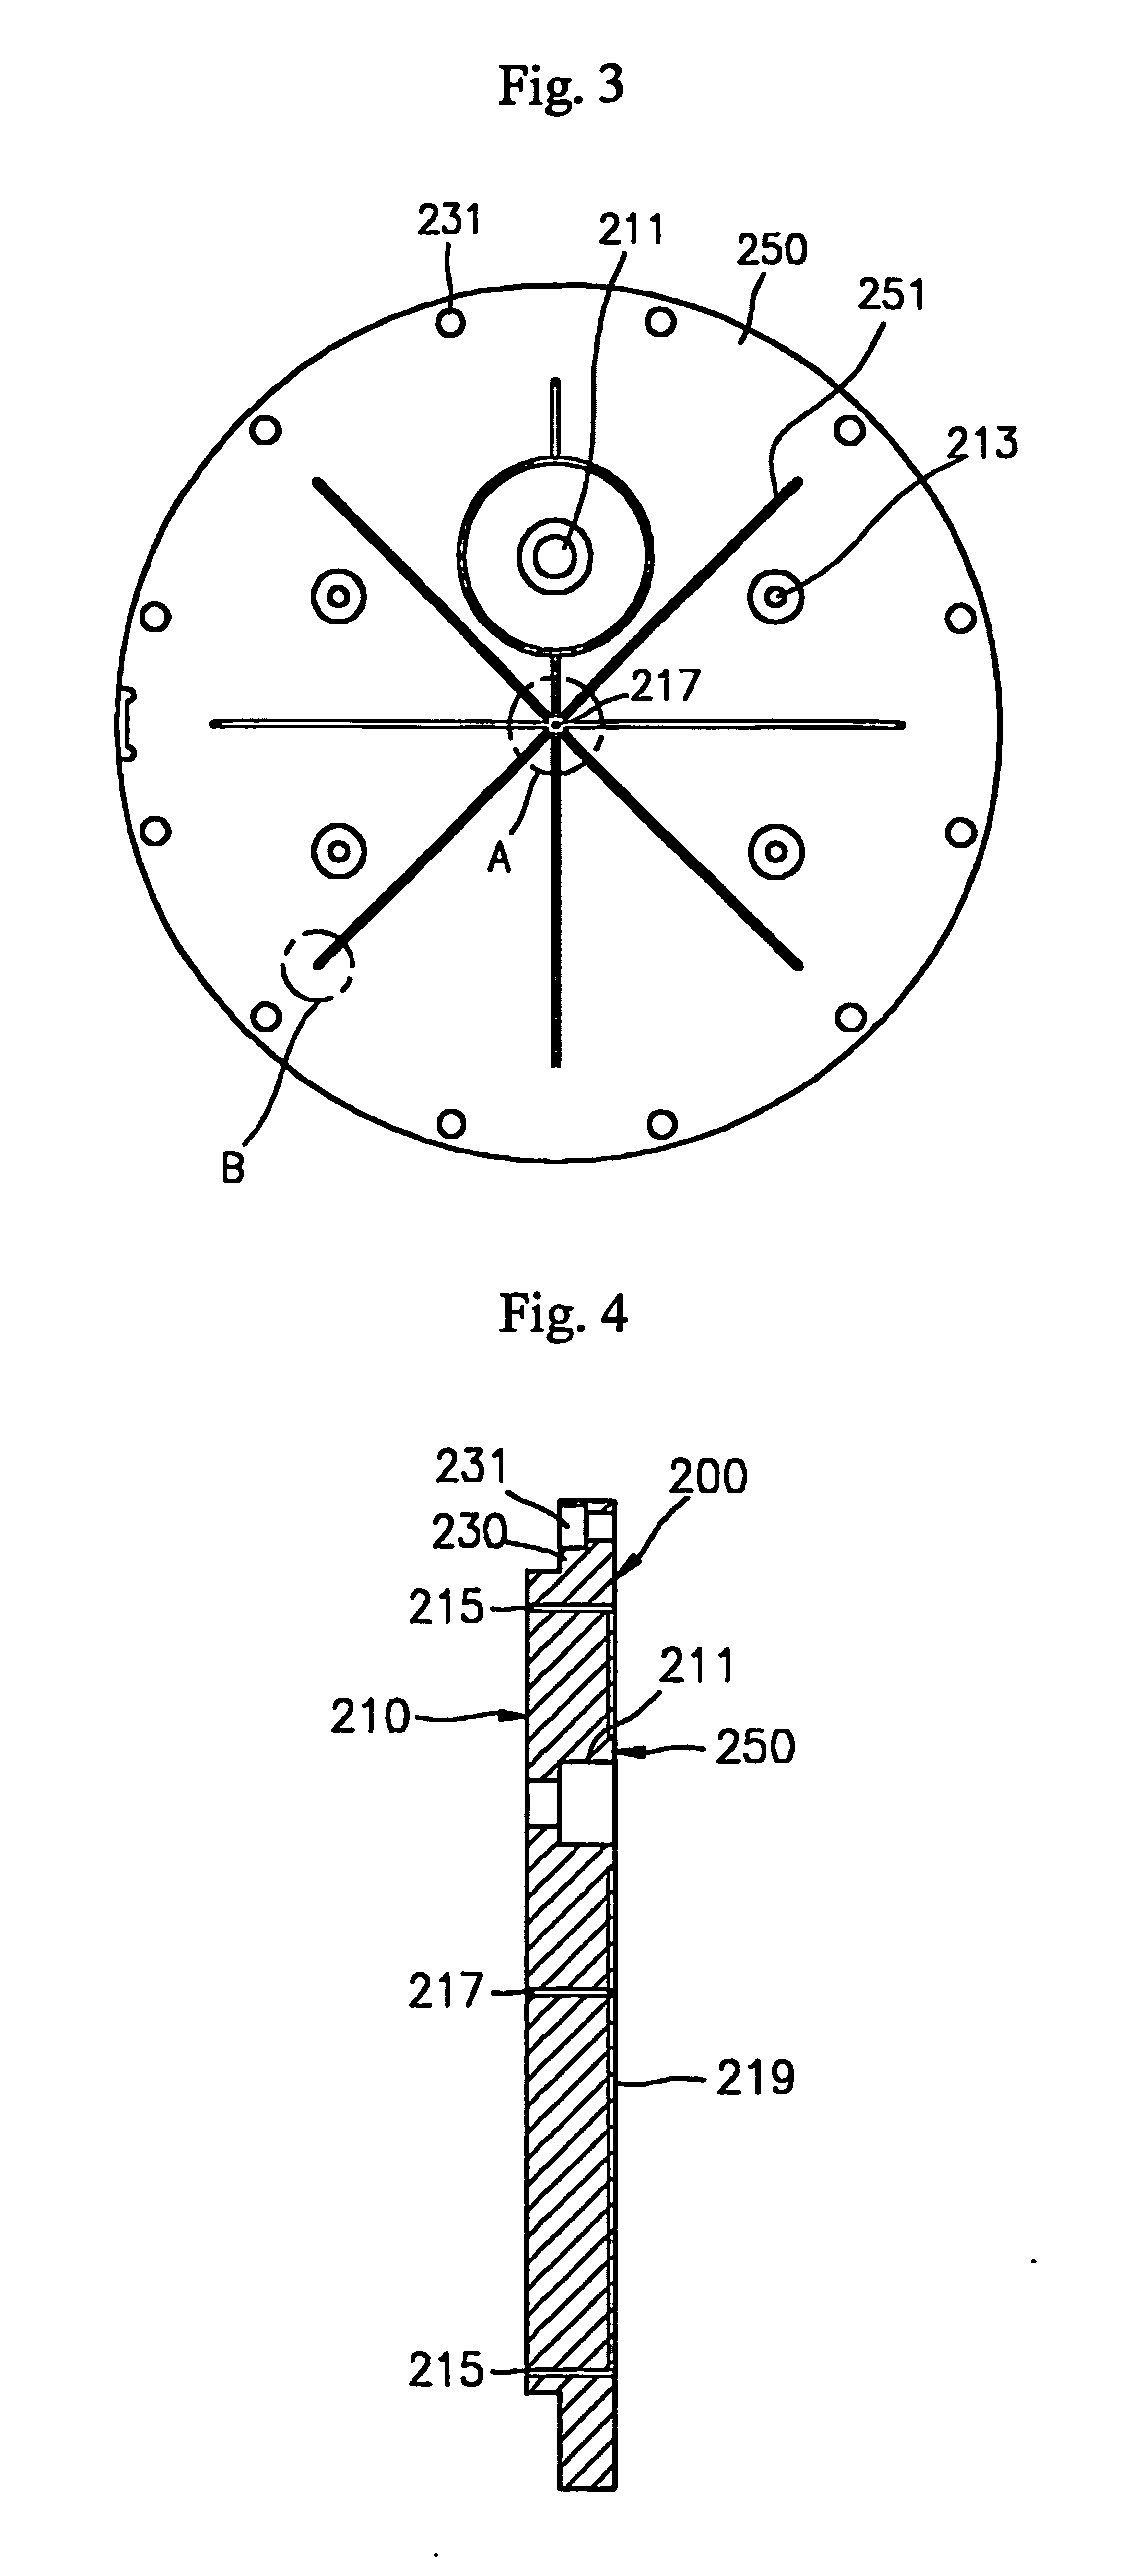 Electrostatic Chuck And Chuck Base Having Cooling Path For Cooling Wafer